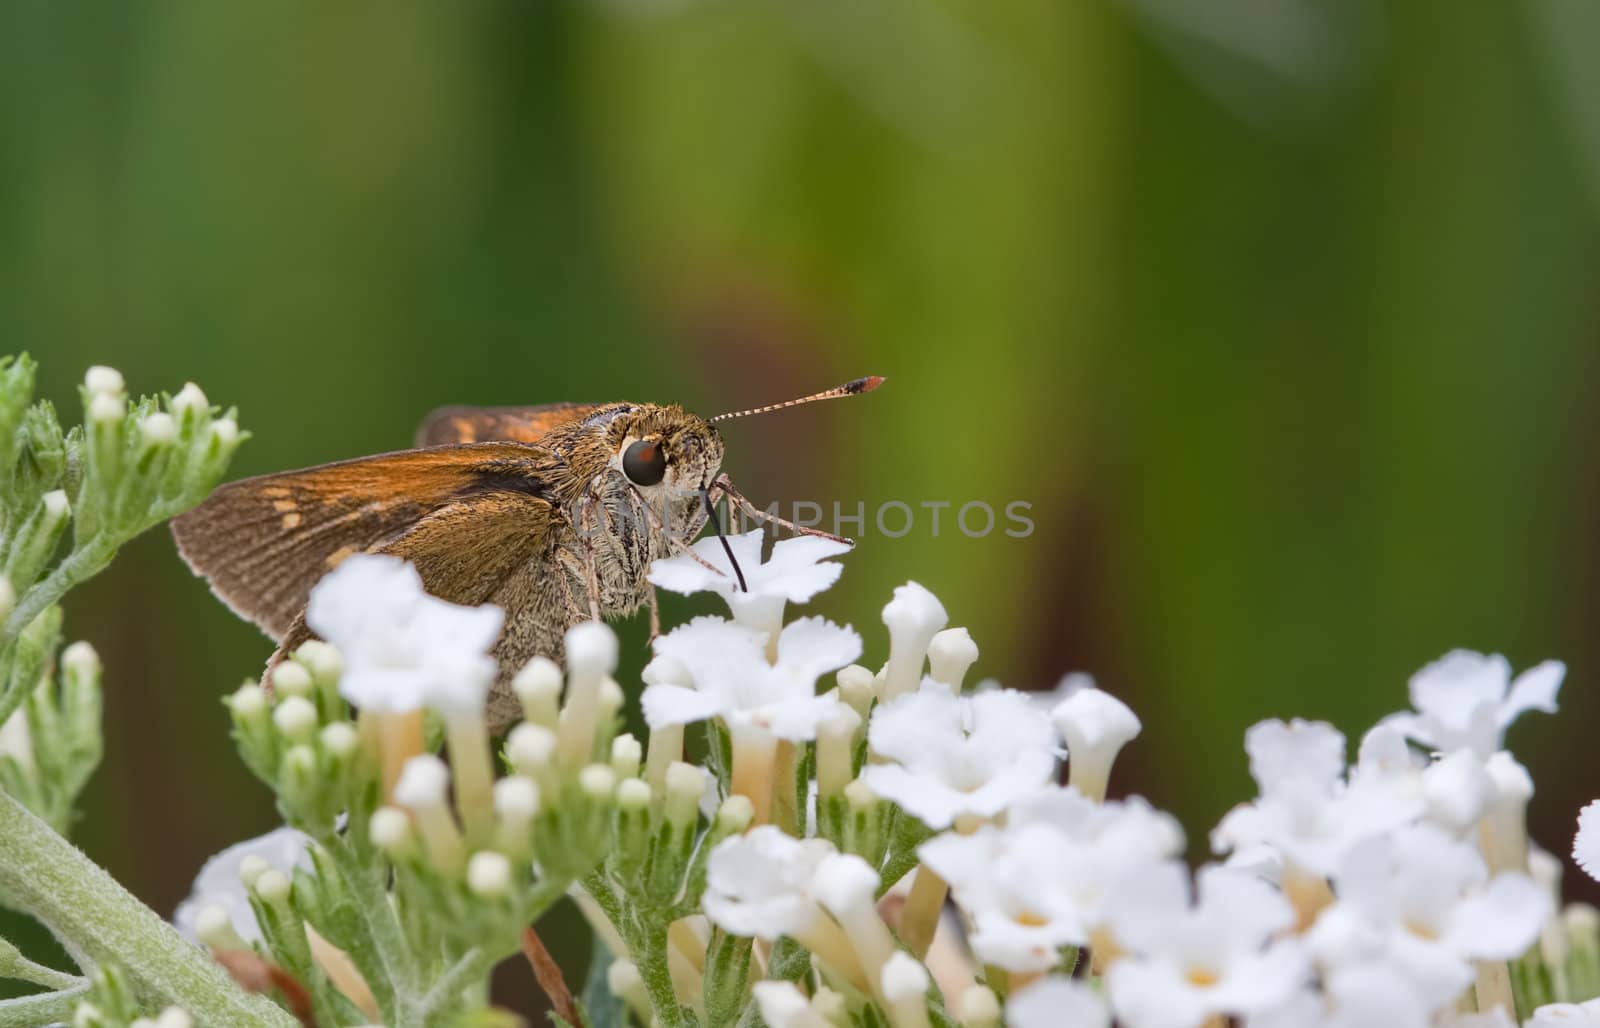 Silver-Spotted Skipper Butterfly Sucking Nectar by sbonk